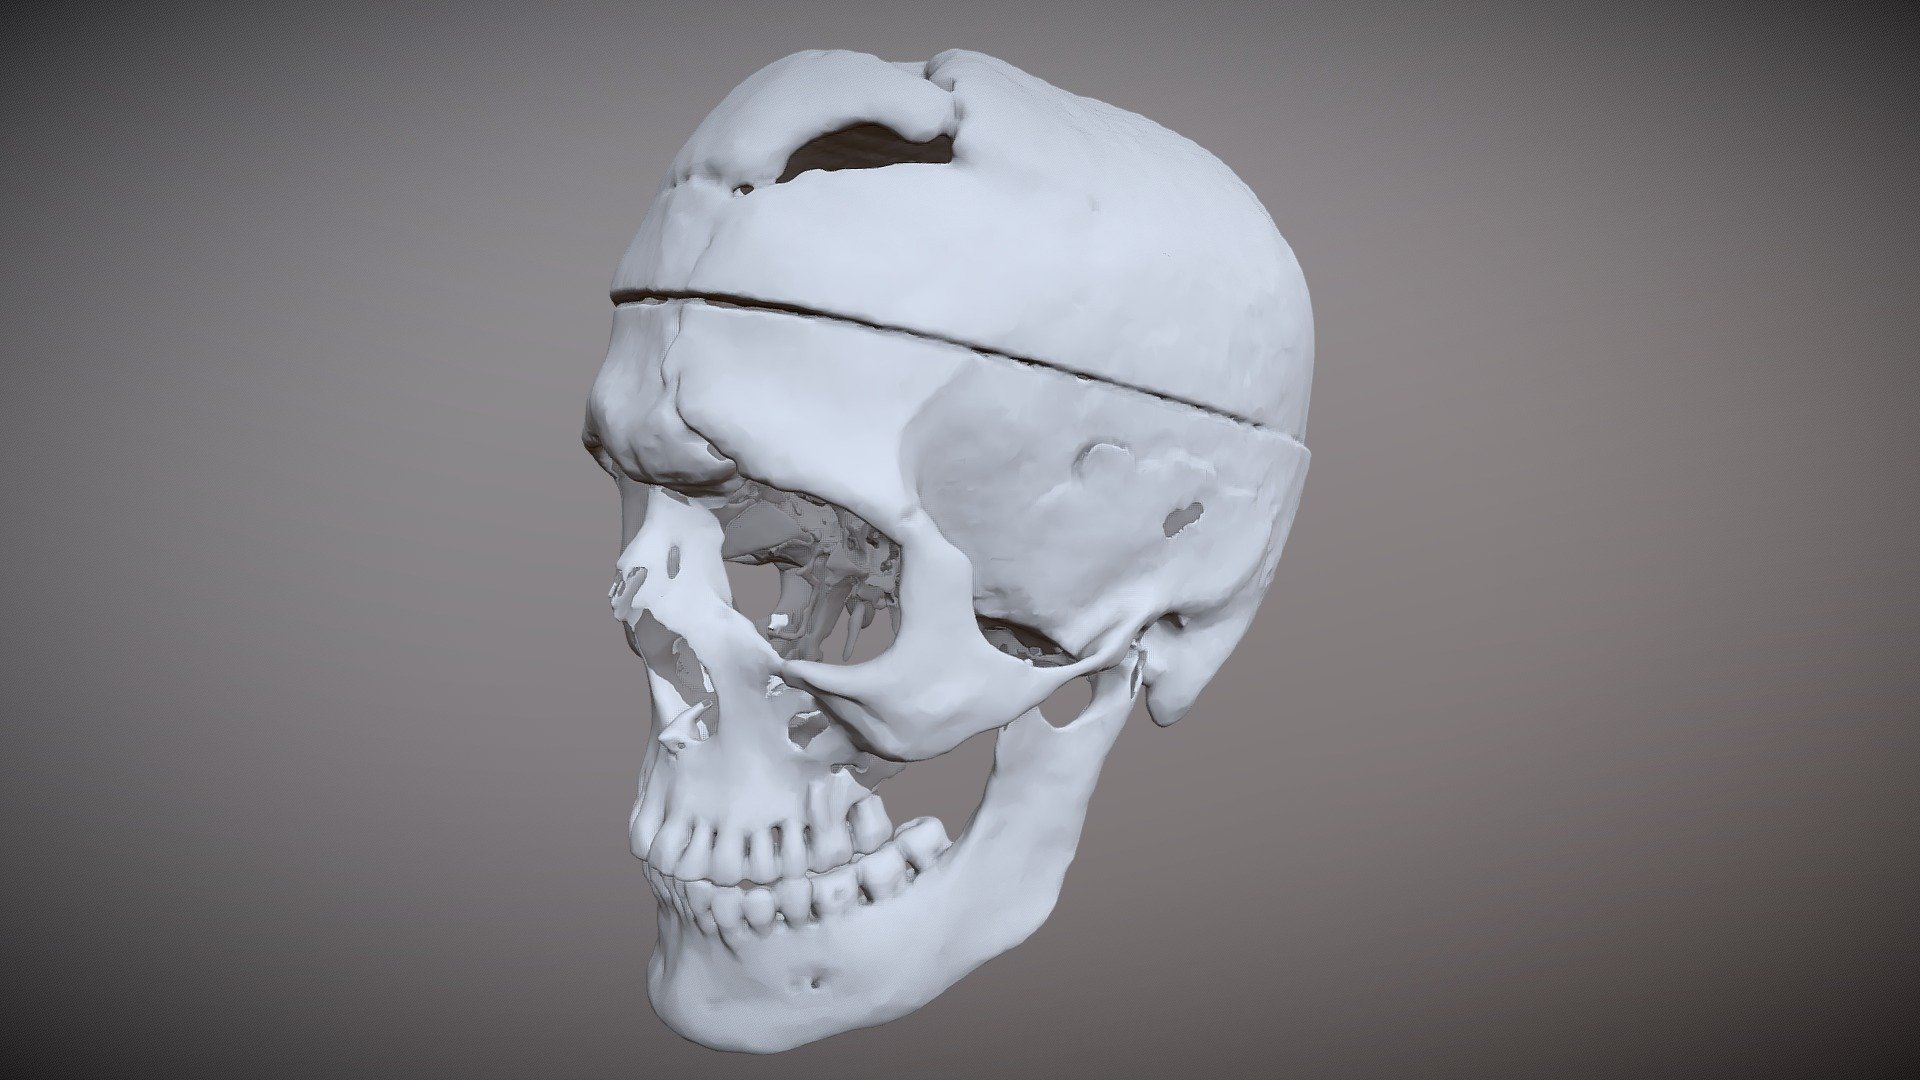 Skull of Phineas Gage